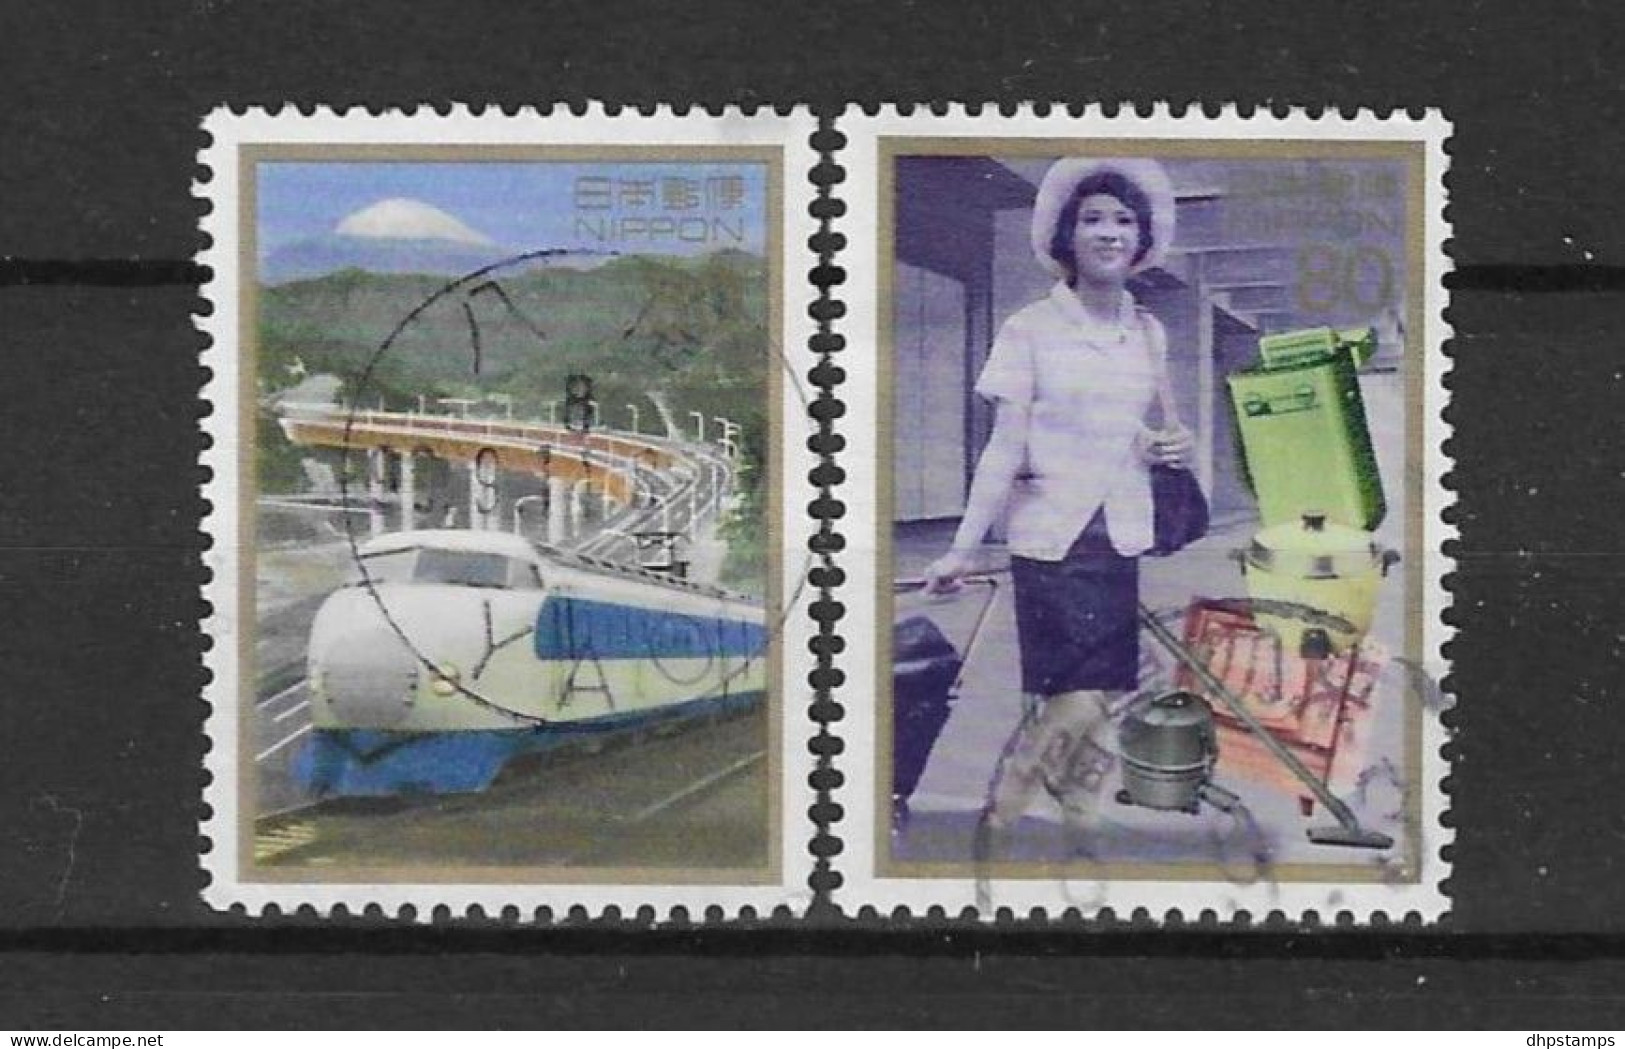 Japan 1996 Events Y.T. 2287/2288 (0) - Used Stamps